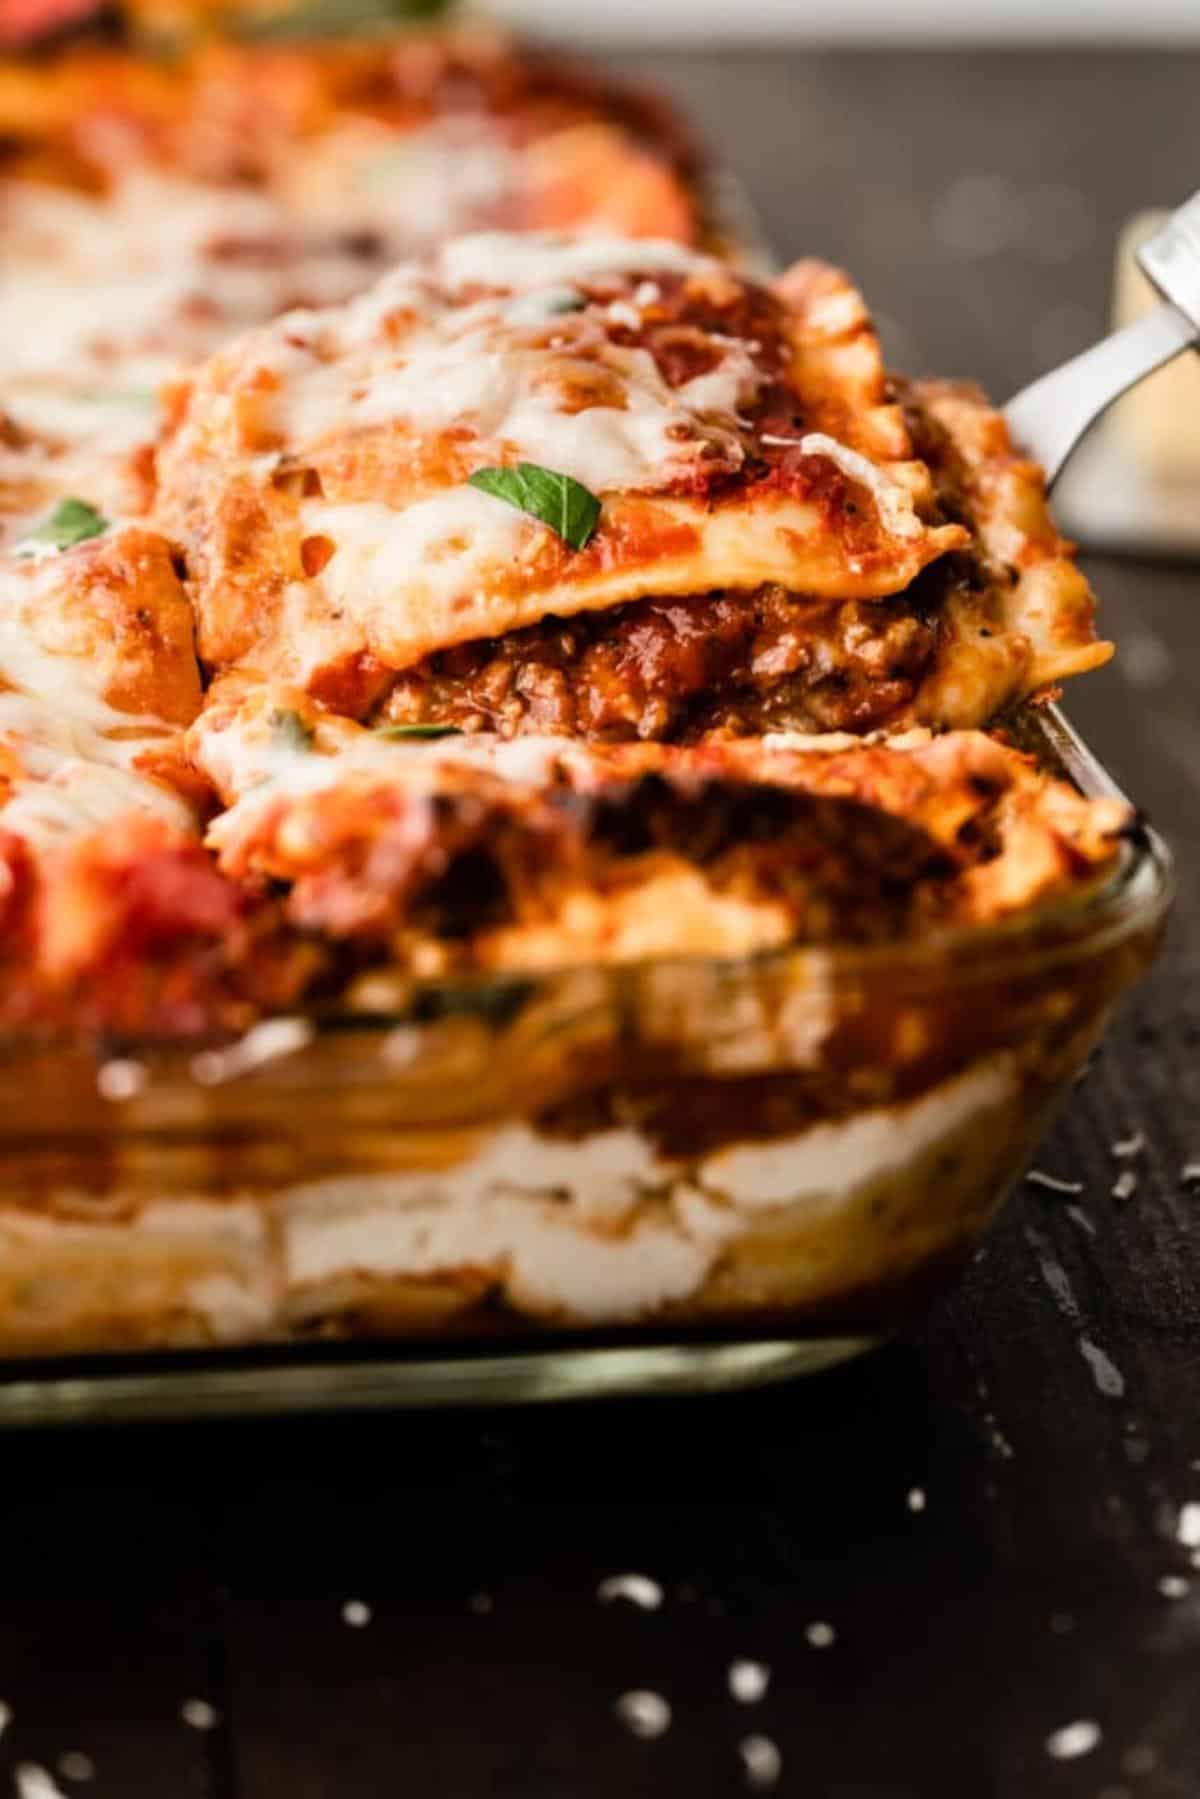 A lasagna being taken out of a baking dish.